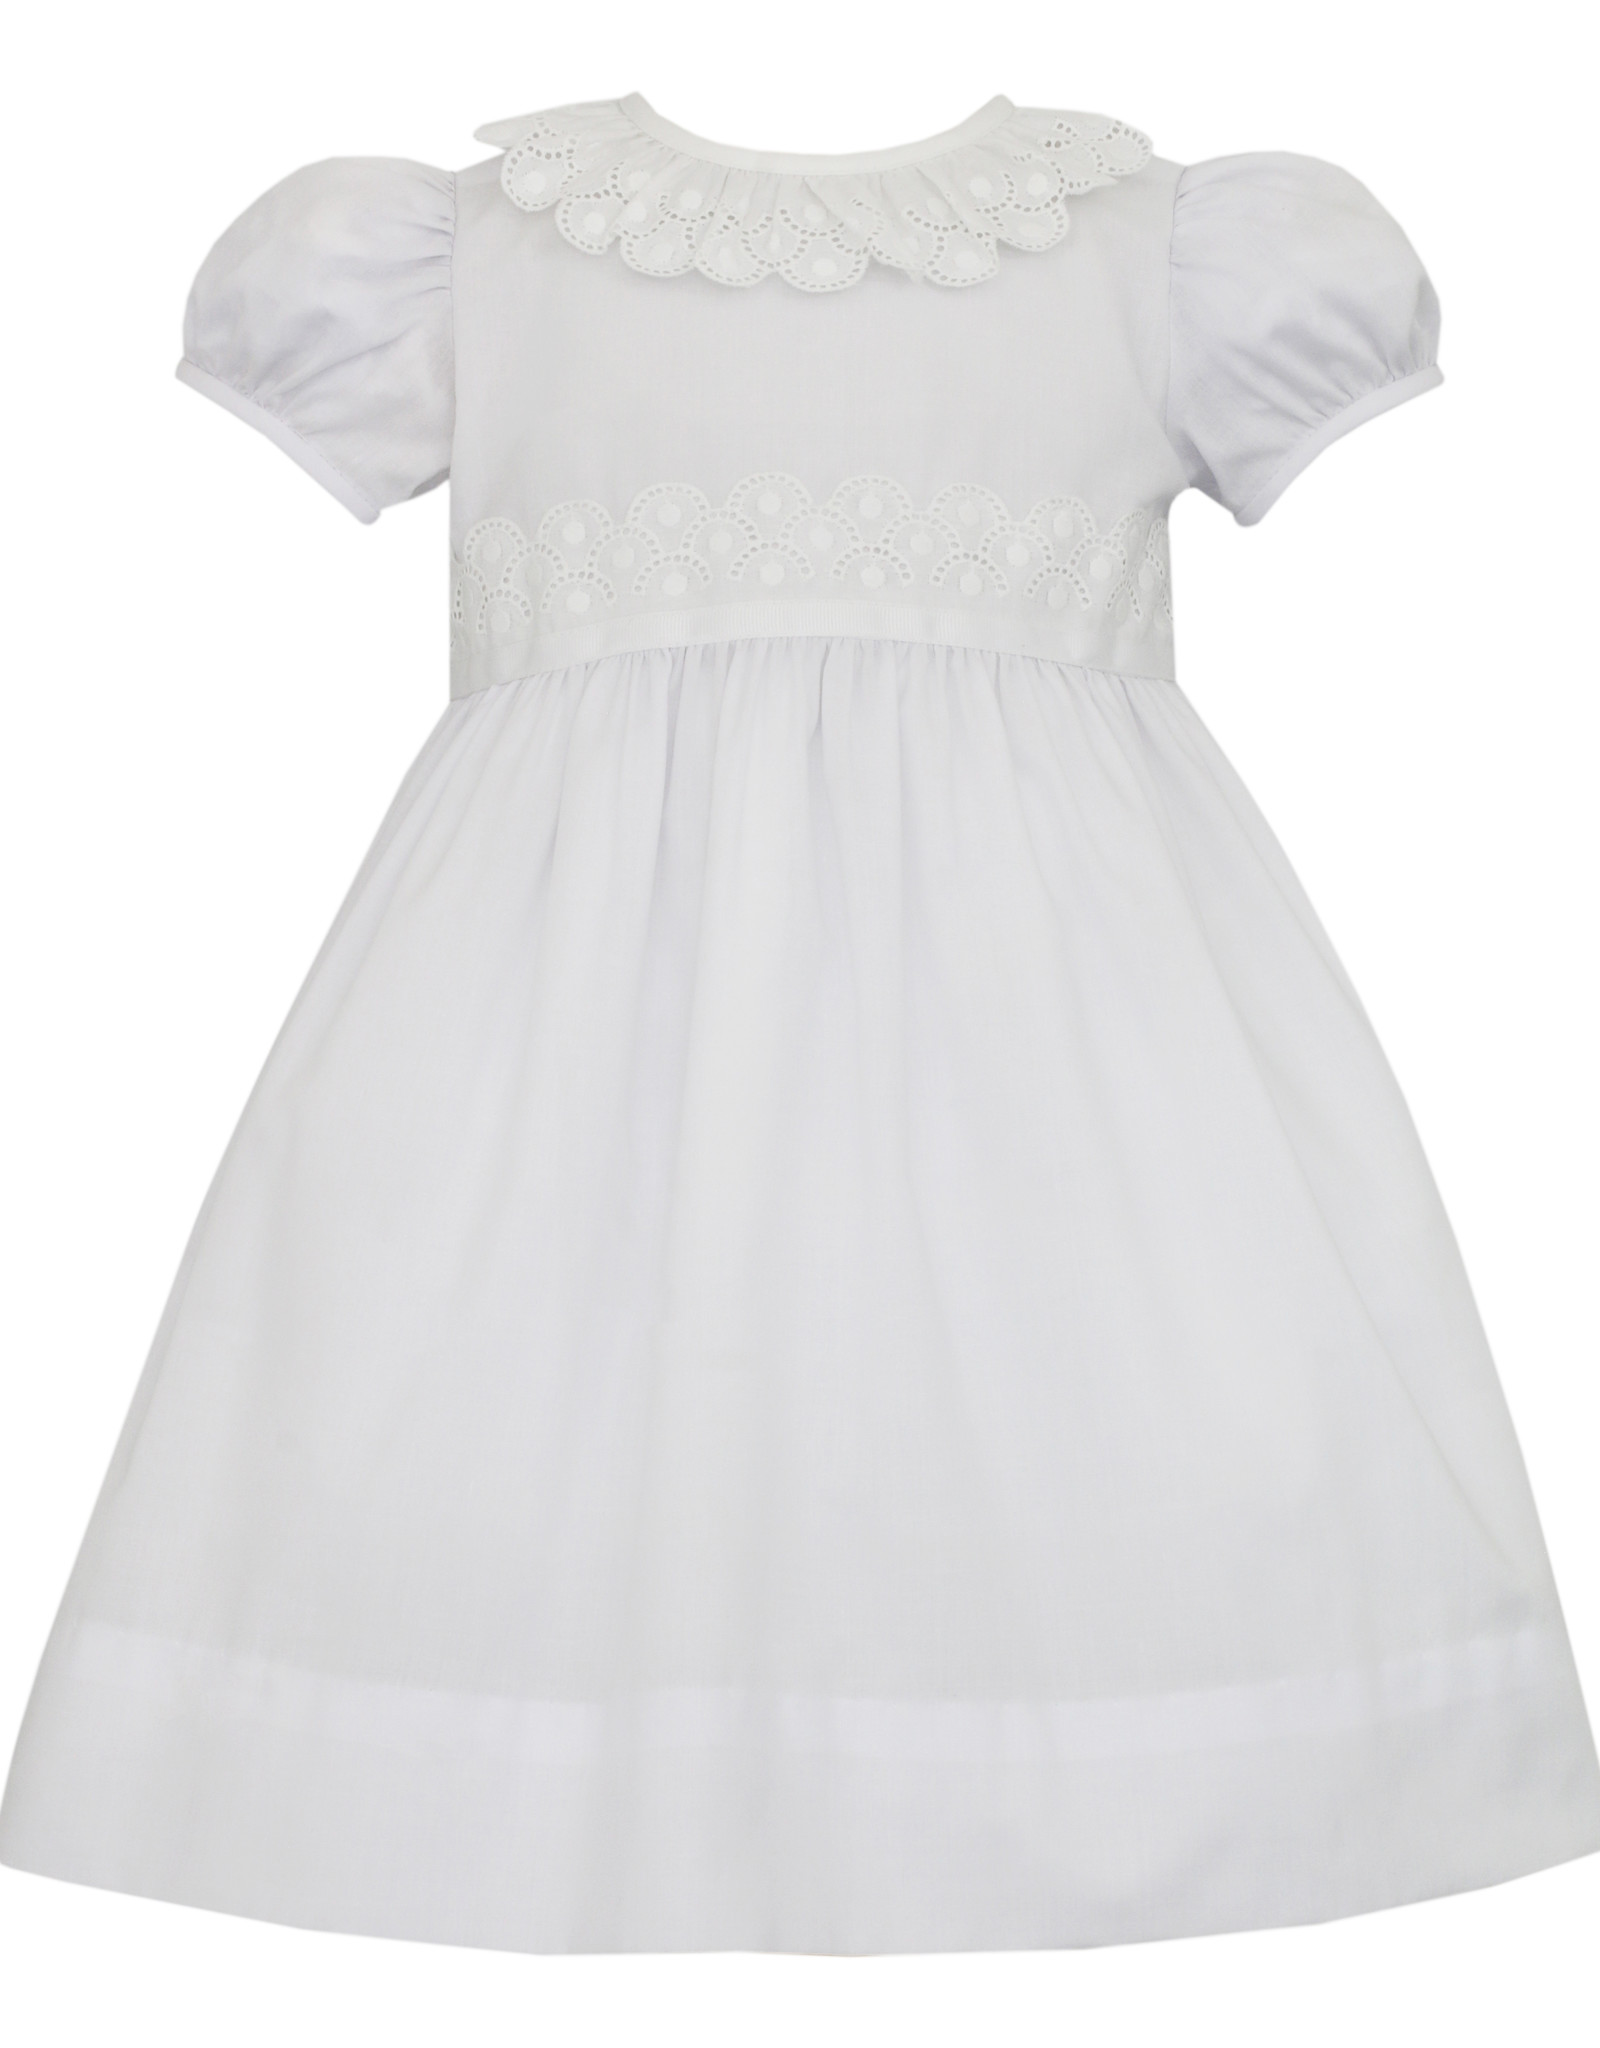 Claire and Charlie White Batiste Dress with Swiss Eyelet